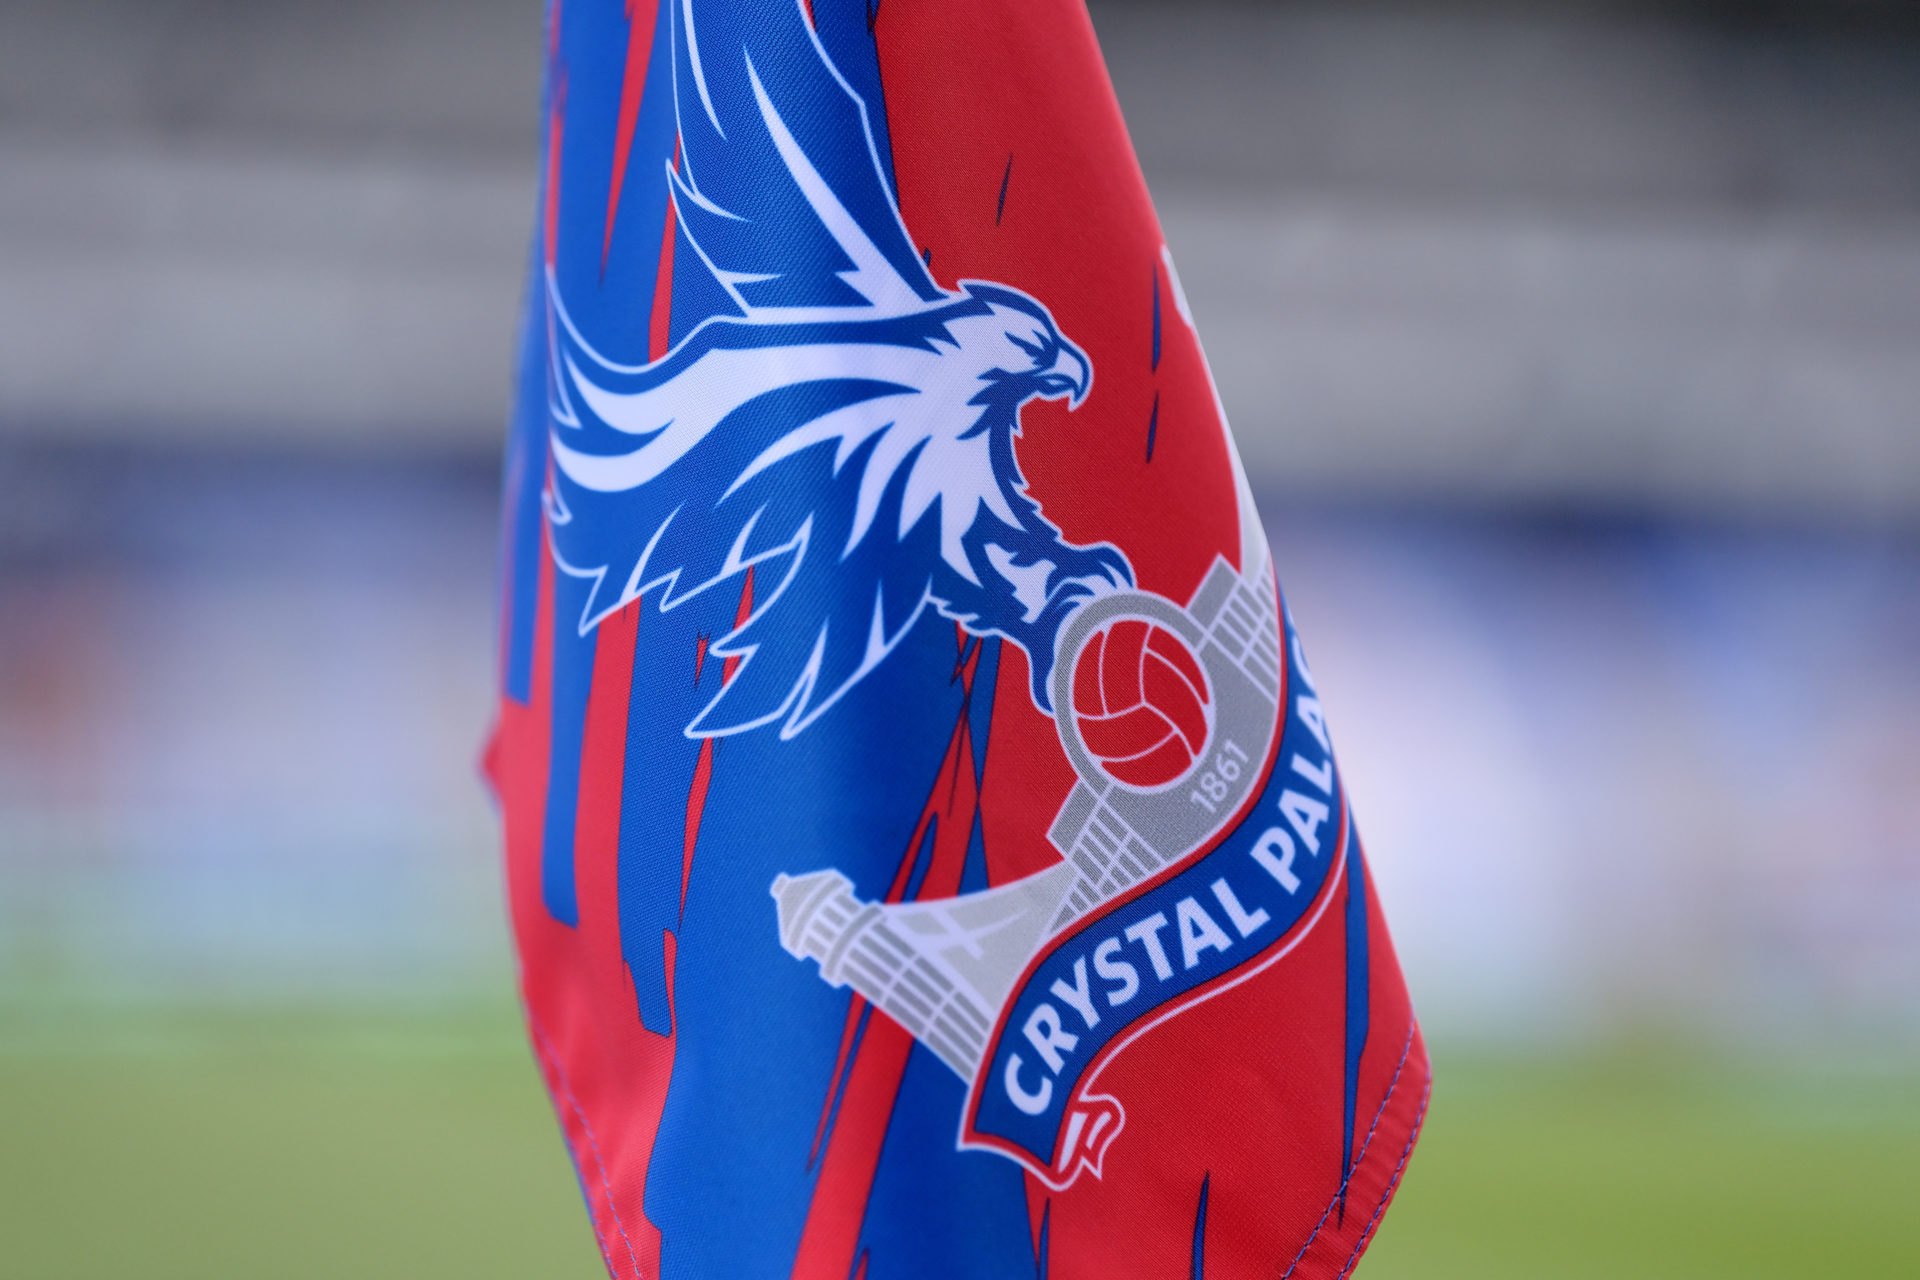 NEWS UPDATE: Crystal Palace now want to sign the 20-year-old Championship talent, who made his professional debut at Selhurst Park…